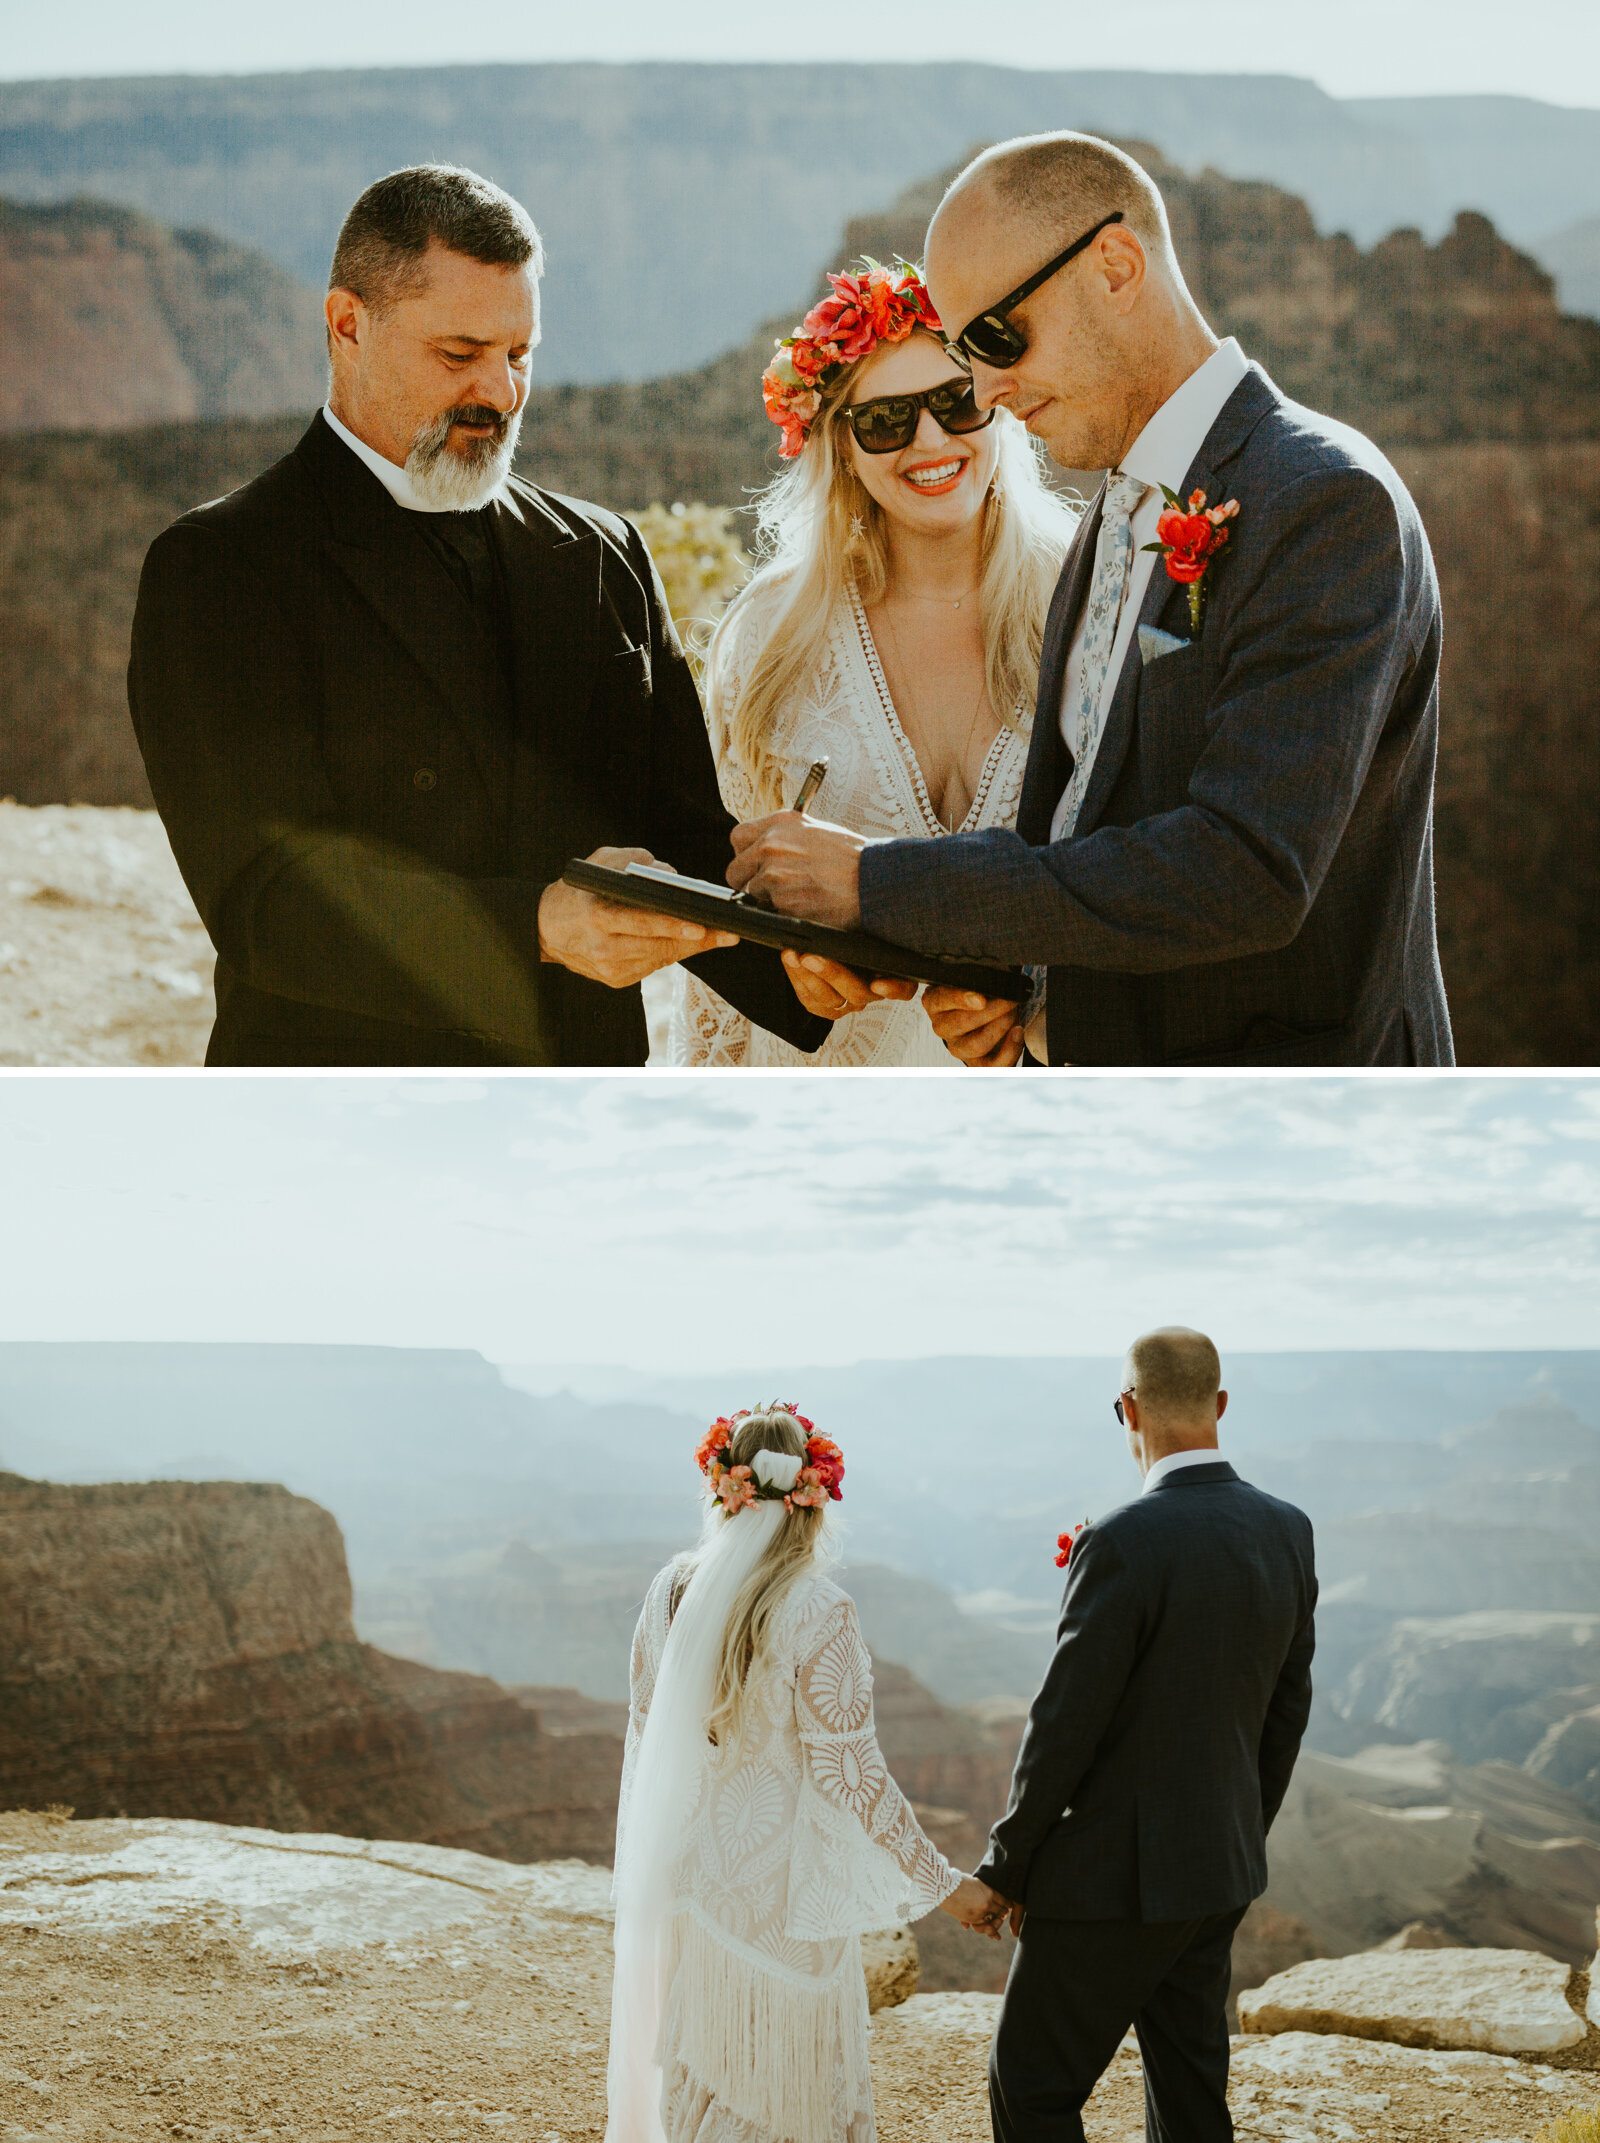 Grand Canyon National Park Elopement Moran Point Arizona boho wedding Photography boho style inspo bohemian bride inspiration bibiluxe dress faux flower crown fake wedding flowers signing marriage license wedding certificant officiant .jpg